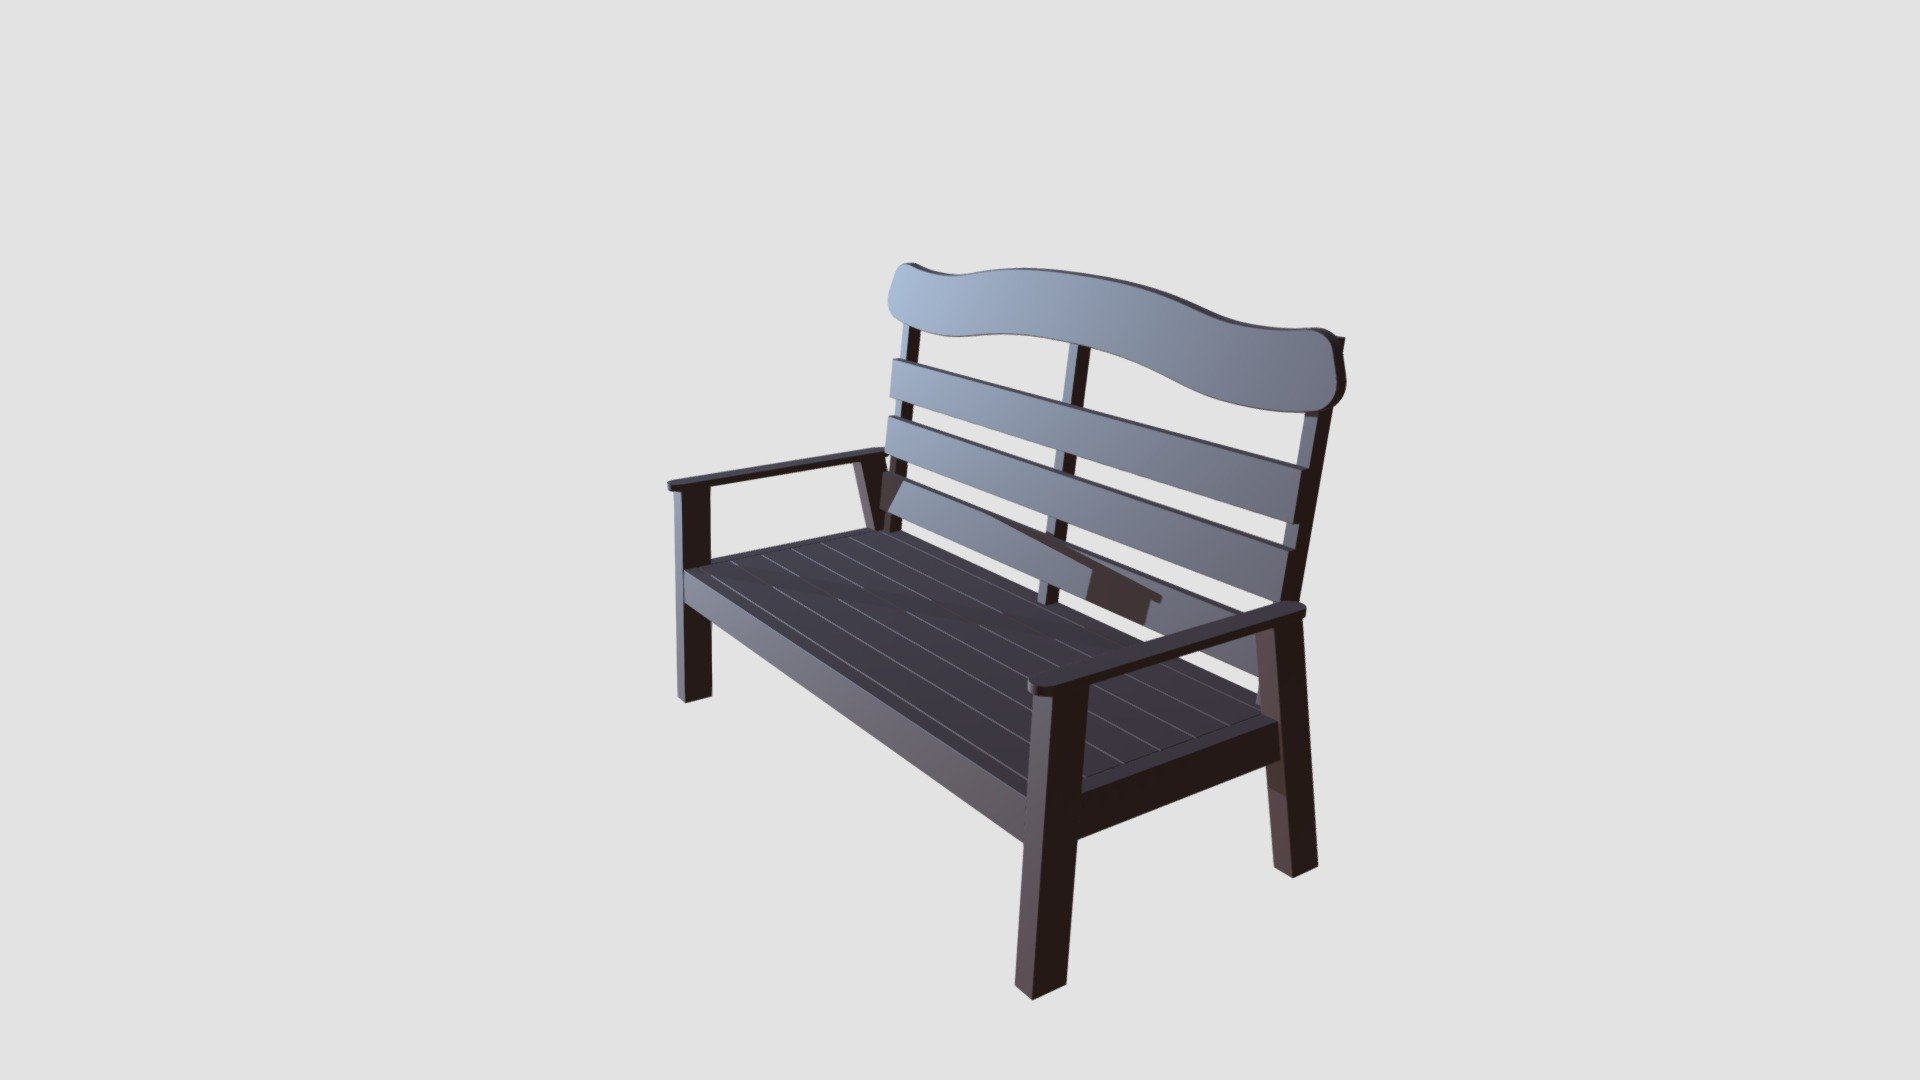 High detailed model of garden bench with all textures, shaders and materials. It is ready to use, just put it into your scene 3d model